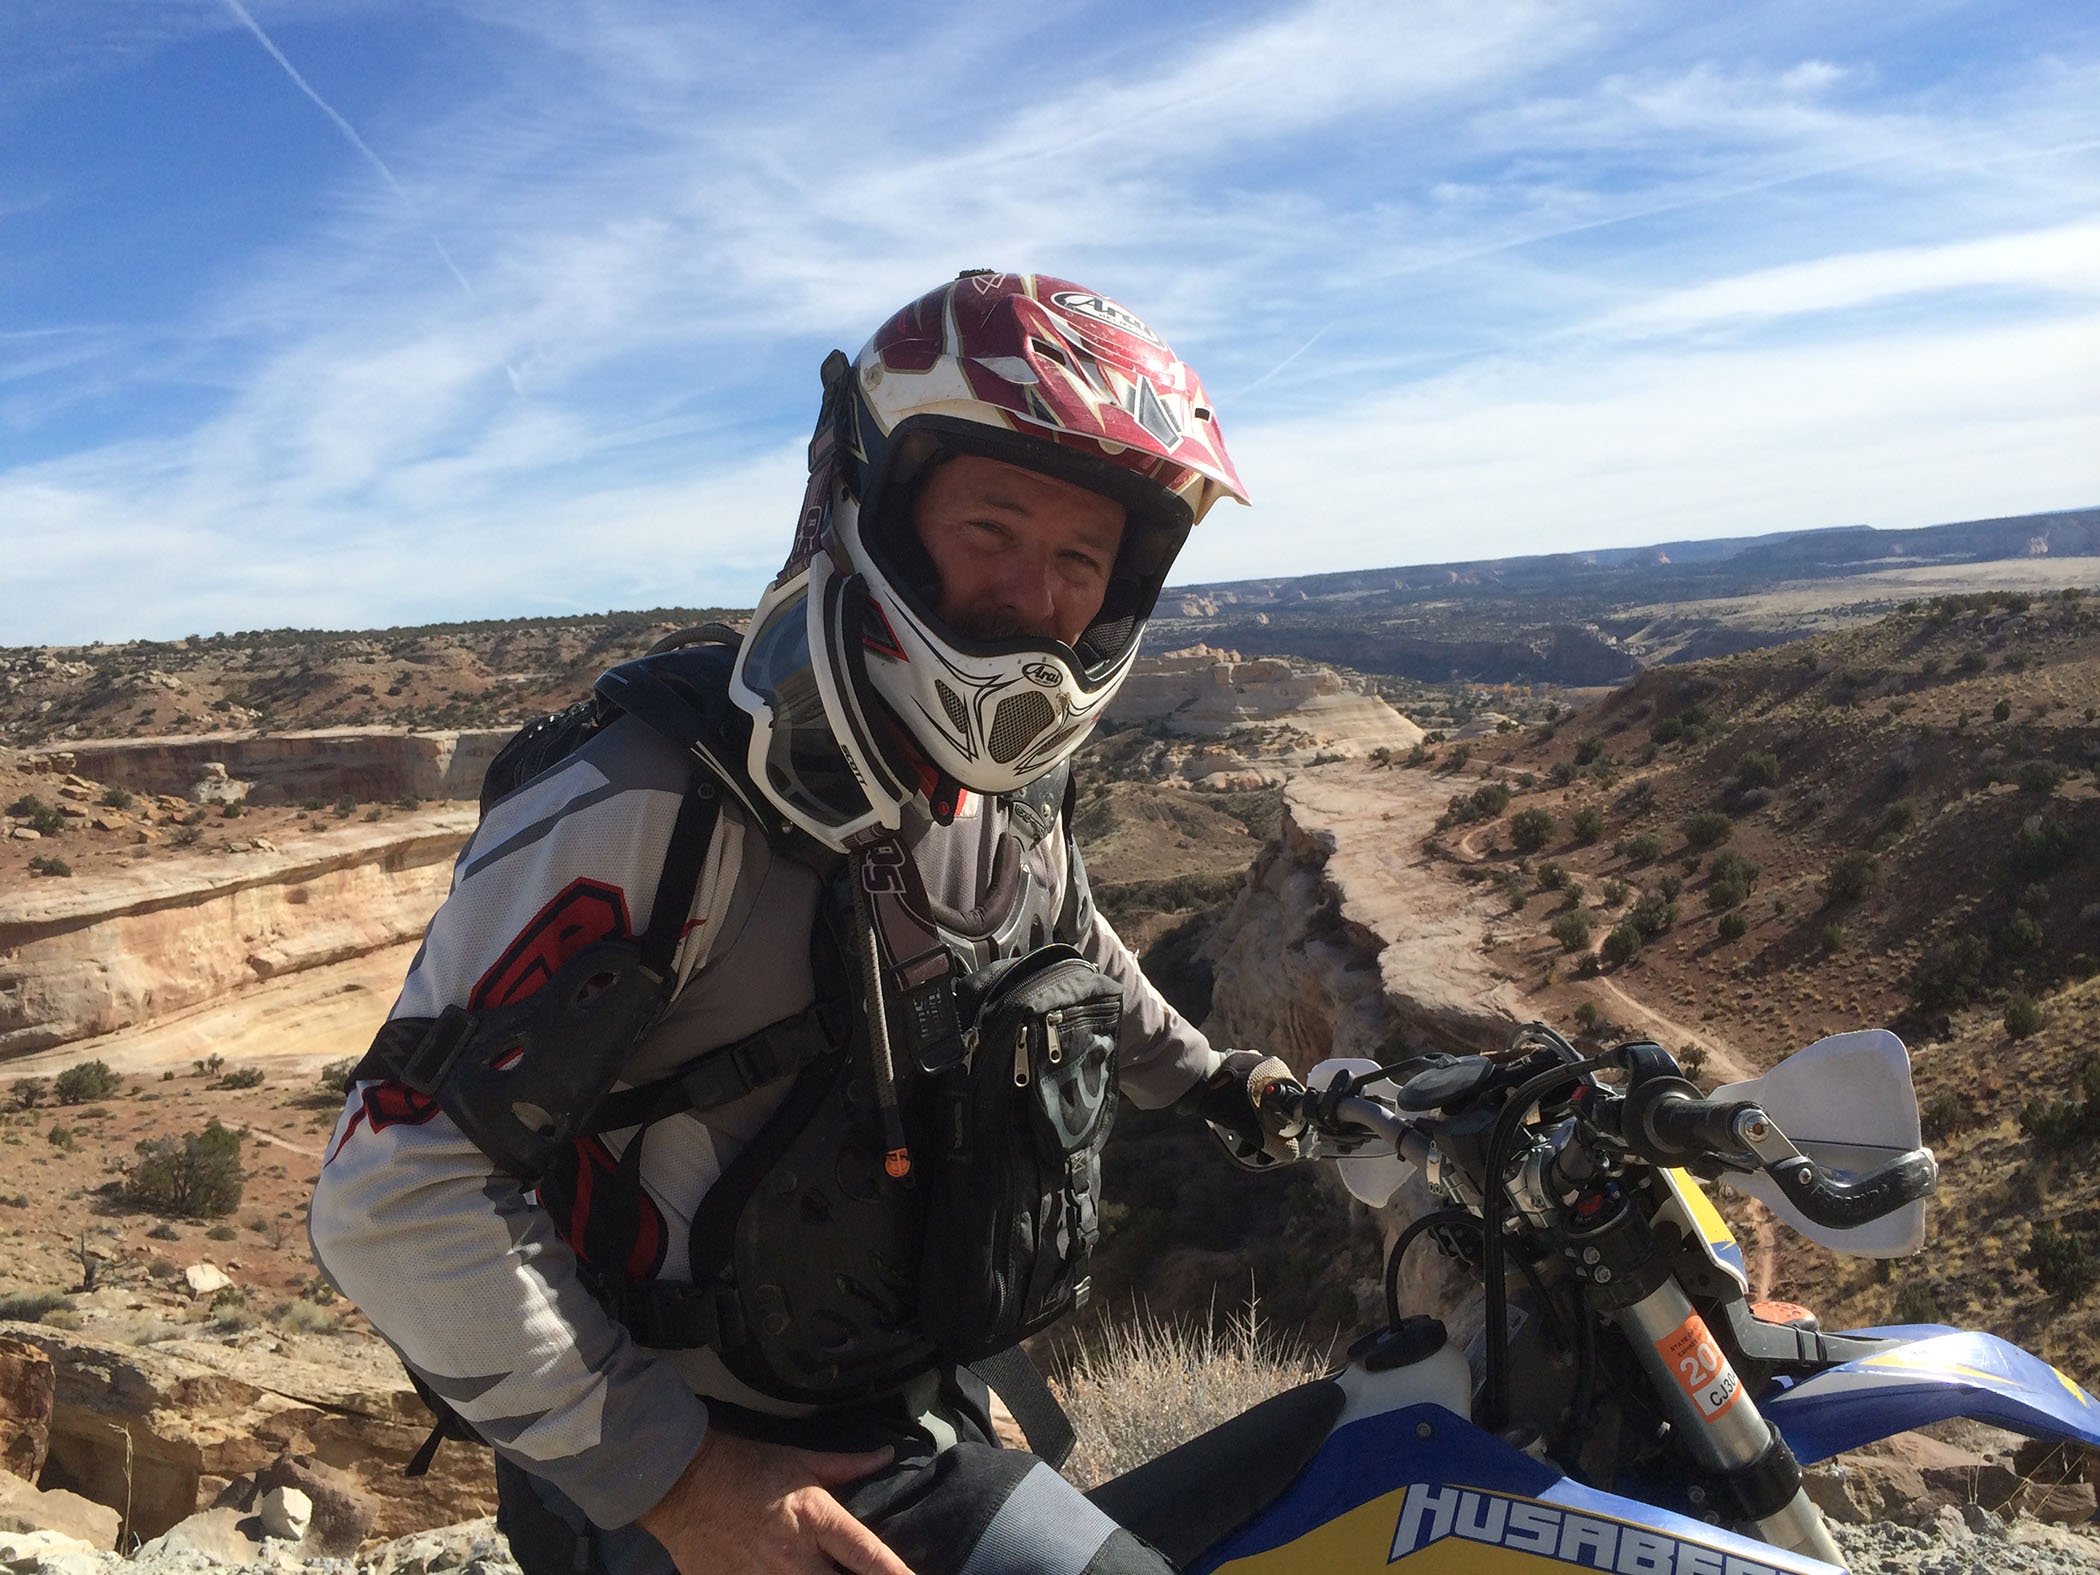 Greg Loftin, our Service Now Expert sits on his dirt bike in Denver.